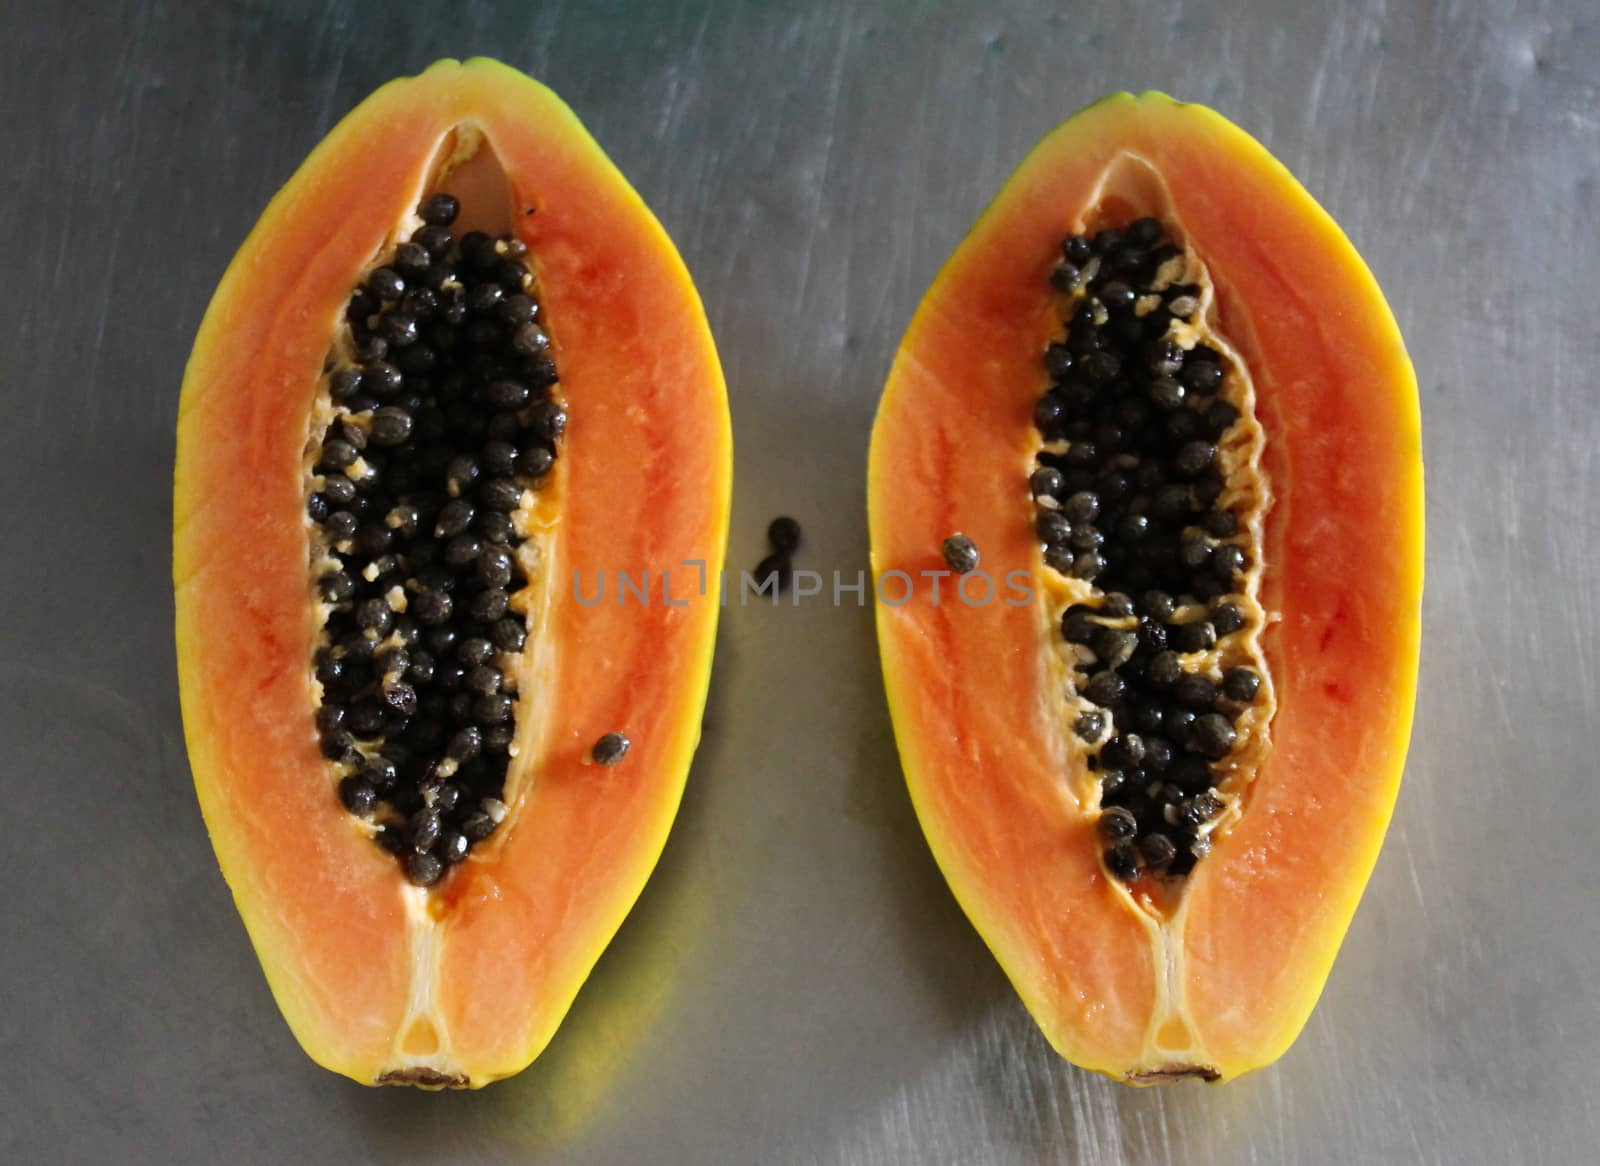 Two halves of papaya fruit on the kitchen table. by mahirrov